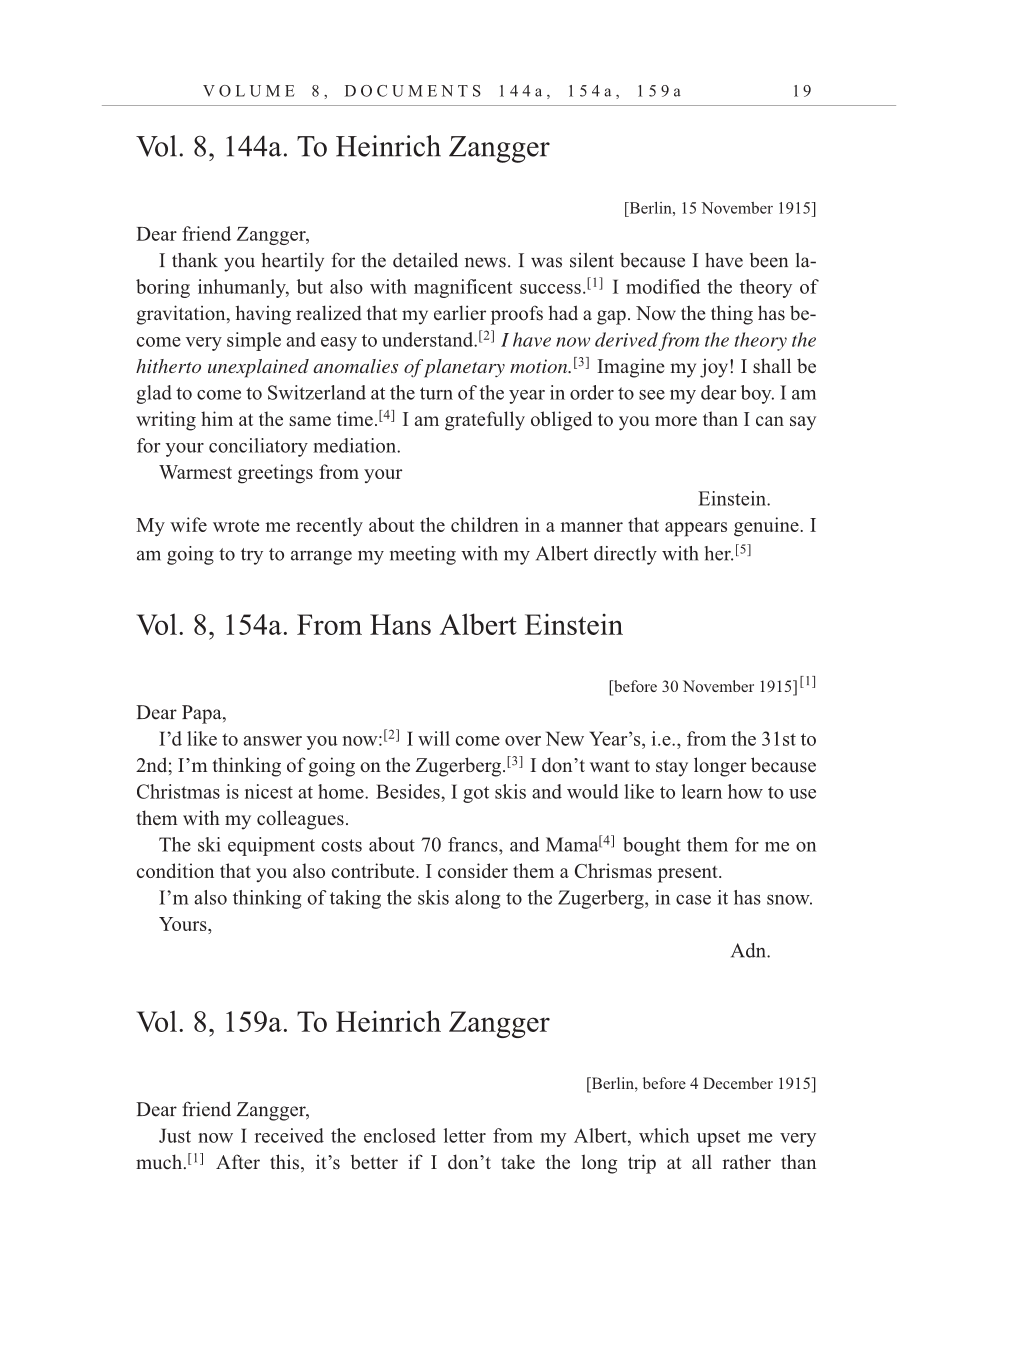 Volume 10: The Berlin Years: Correspondence, May-December 1920, and Supplementary Correspondence, 1909-1920 (English translation supplement) page 19